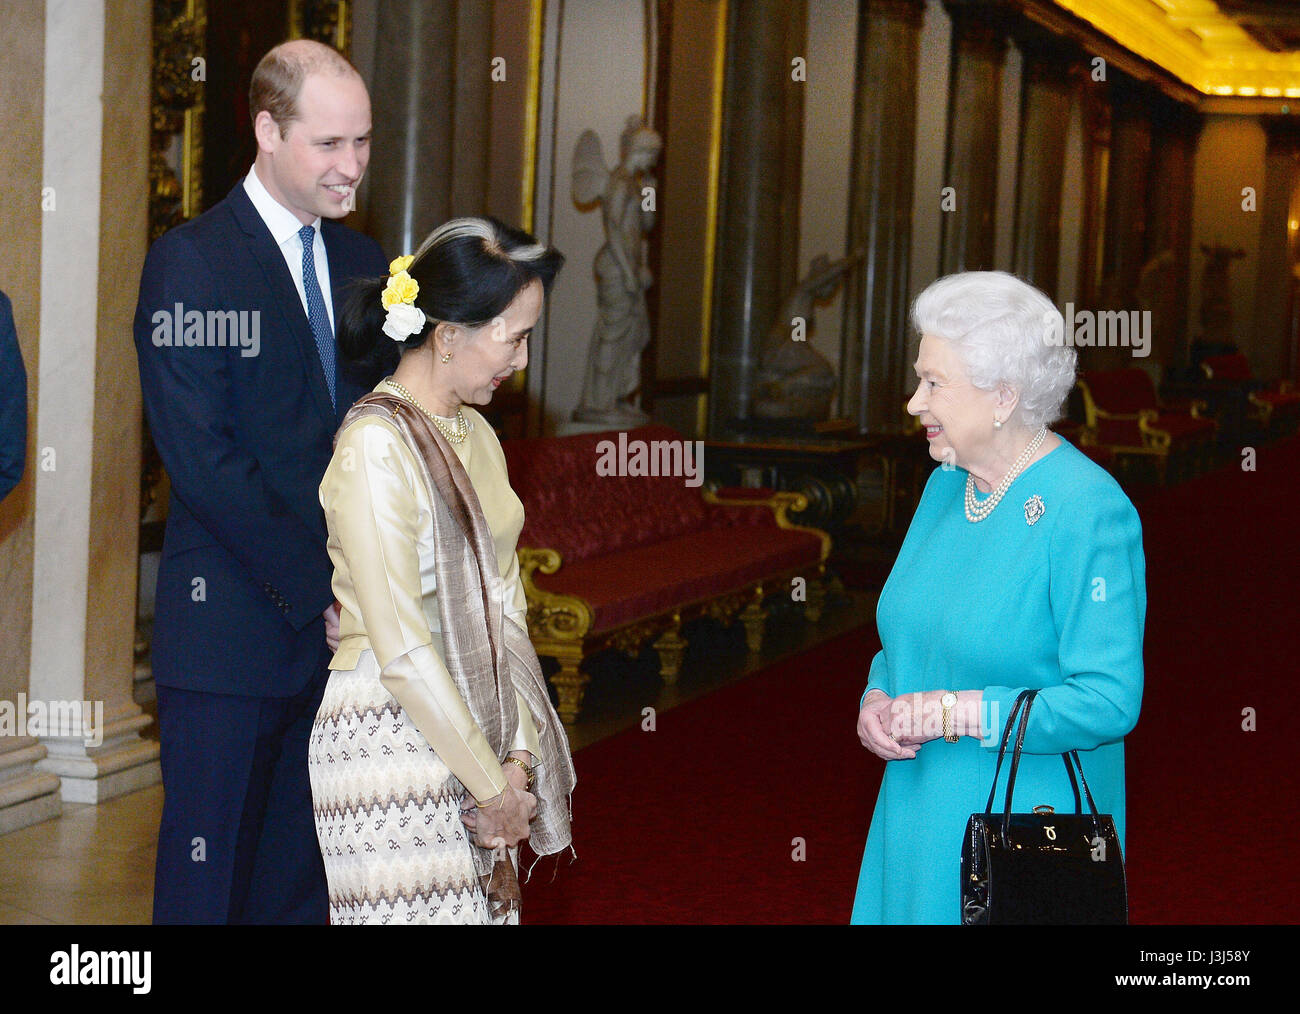 RETRANSMITTED CORRECTING LOCATION Queen Elizabeth II and the Duke of Cambridge greet Burma's de facto leader Aung San Suu Kyi ahead of a private lunch at Buckingham Palace in London. Stock Photo